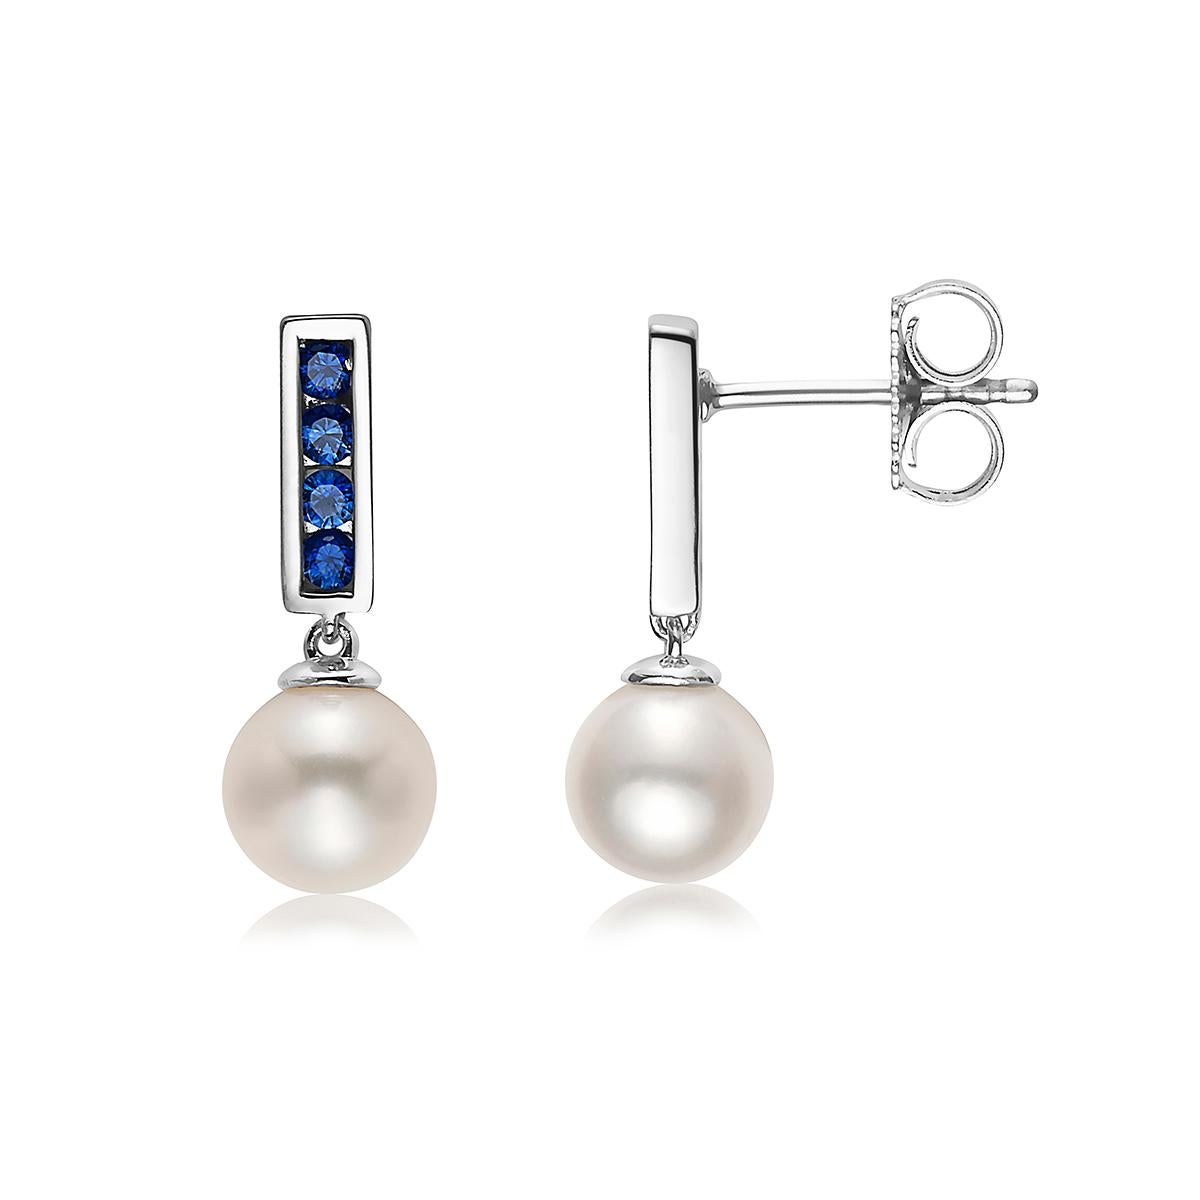 Gorgeous Akoya Pearls measuring 7mm dangle from channel-set genuine blue sapphires with .925 Sterling Silver. This is a modern classic and sure to add a pop of color to your look. Great for everyday wear, these earrings are as versatile as they are